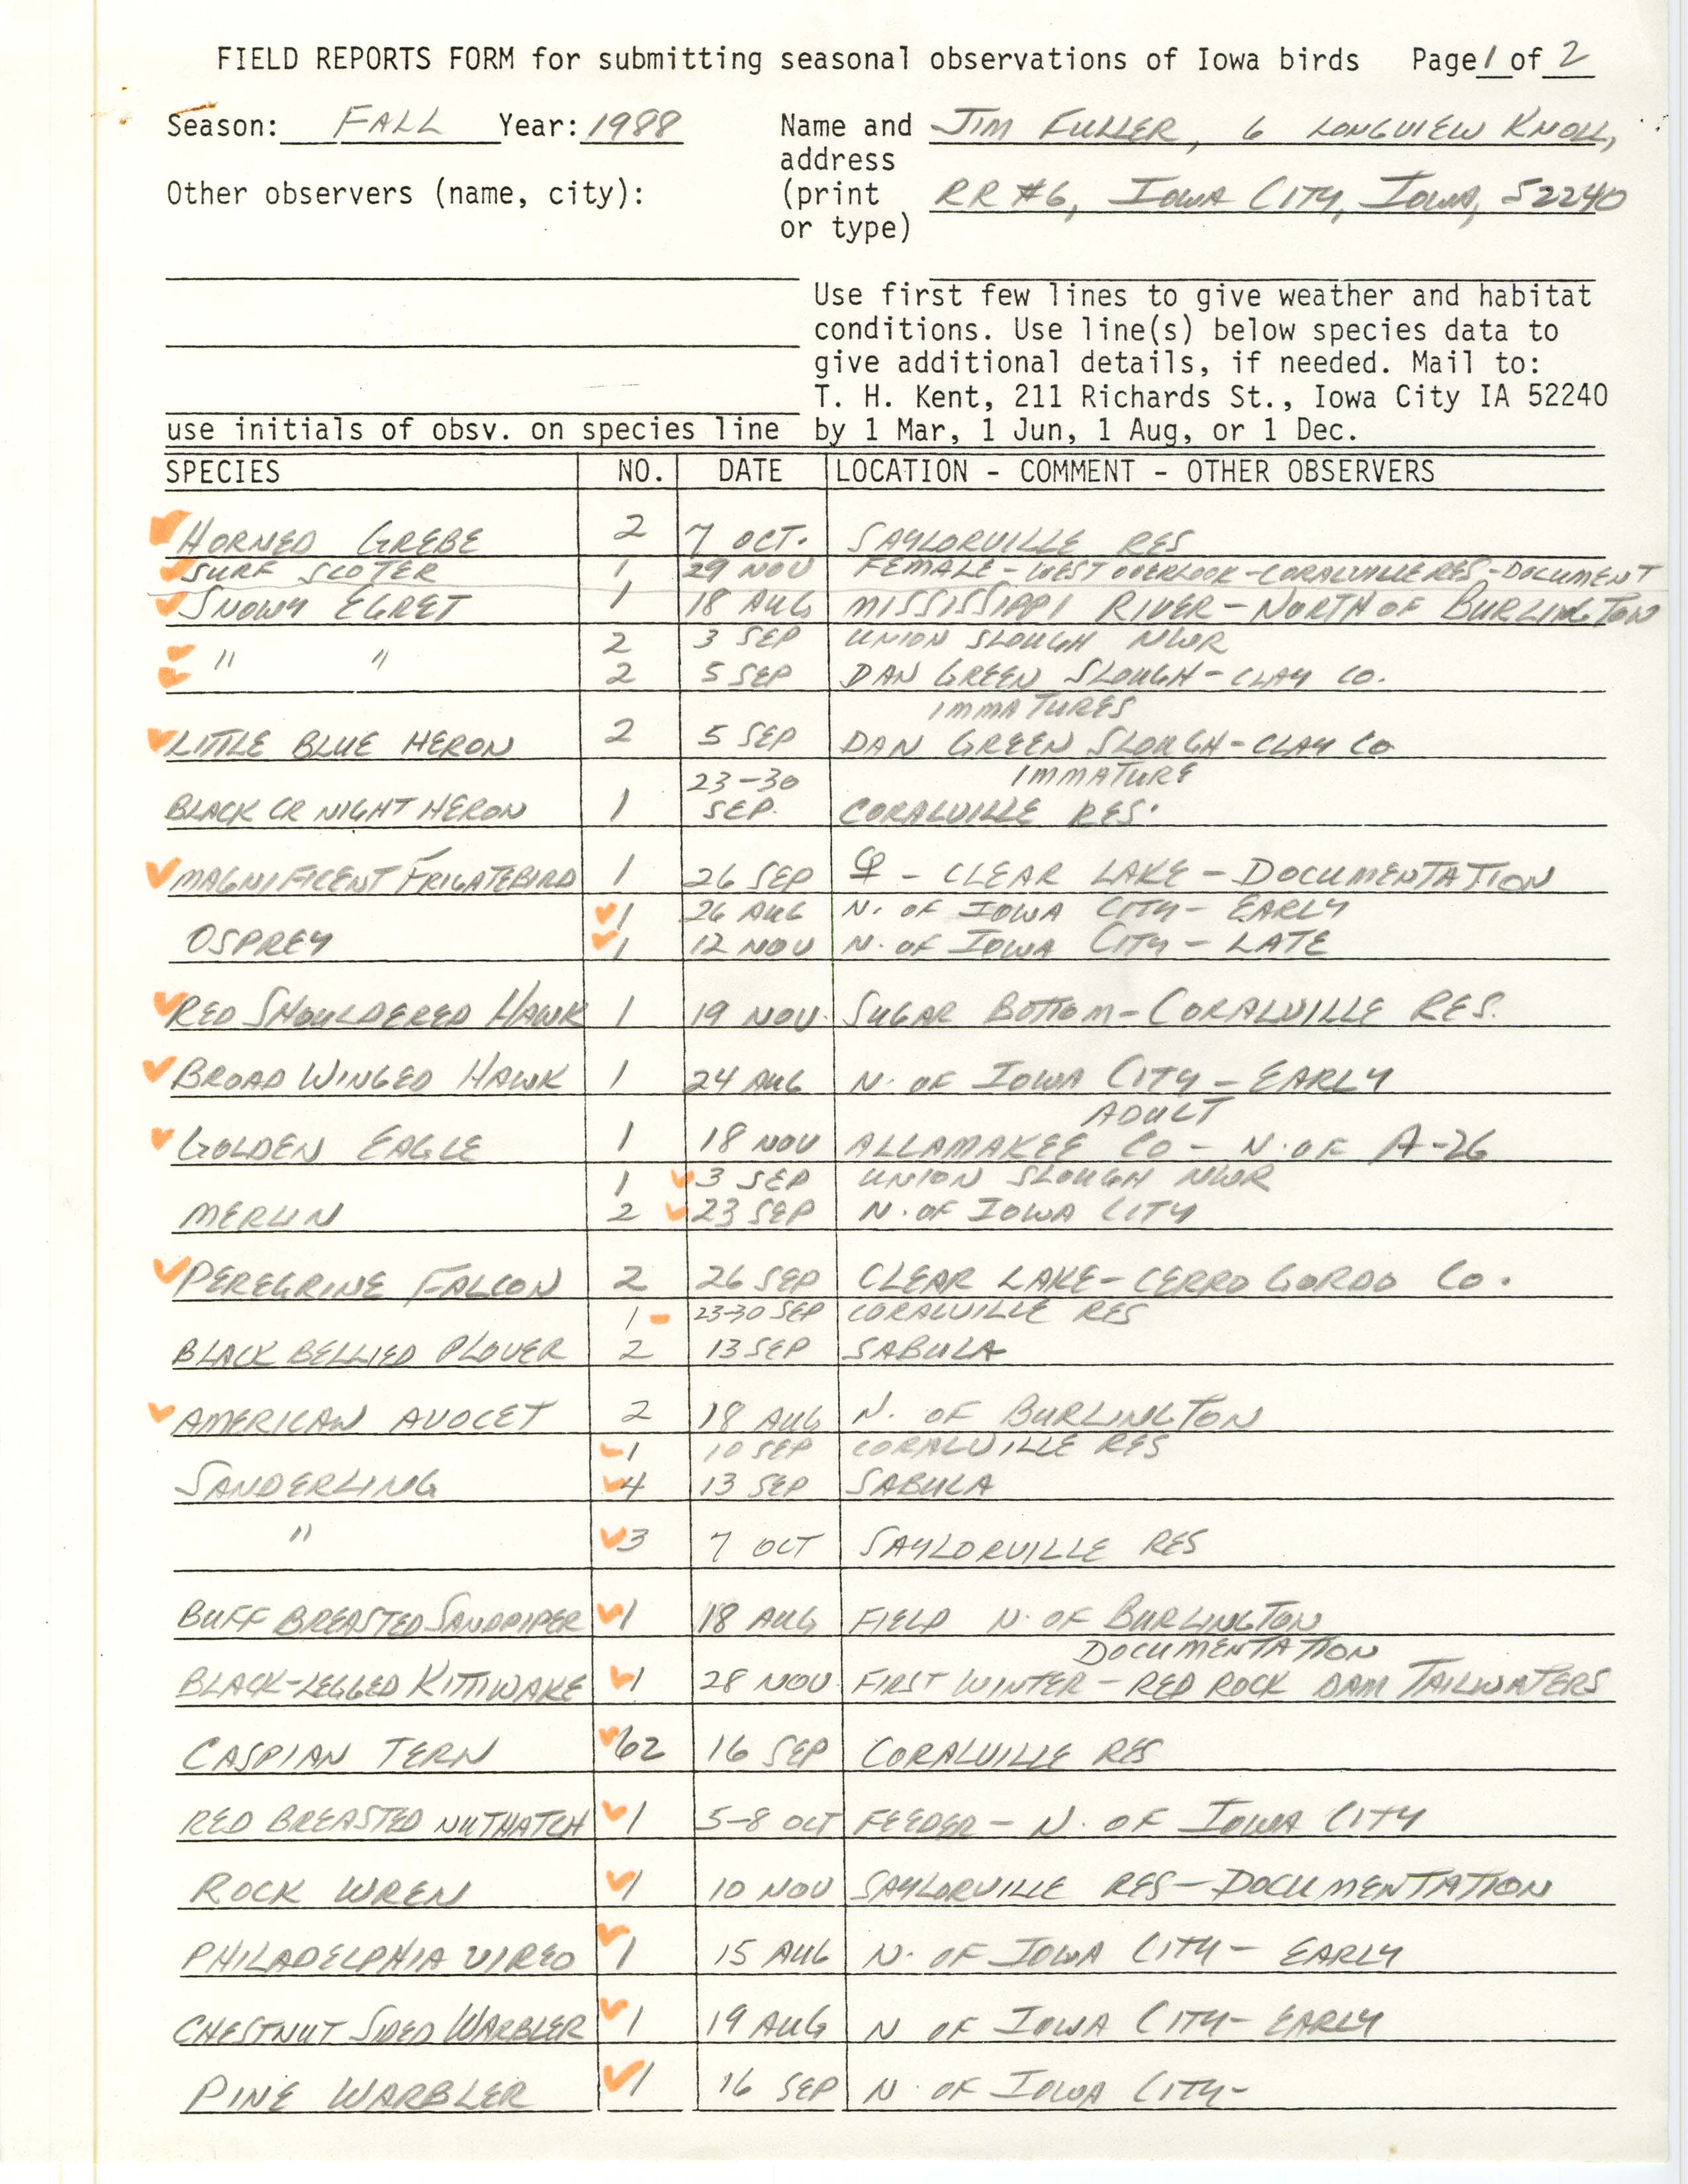 Field reports form for submitting seasonal observations of Iowa birds, James L. Fuller, fall 1988